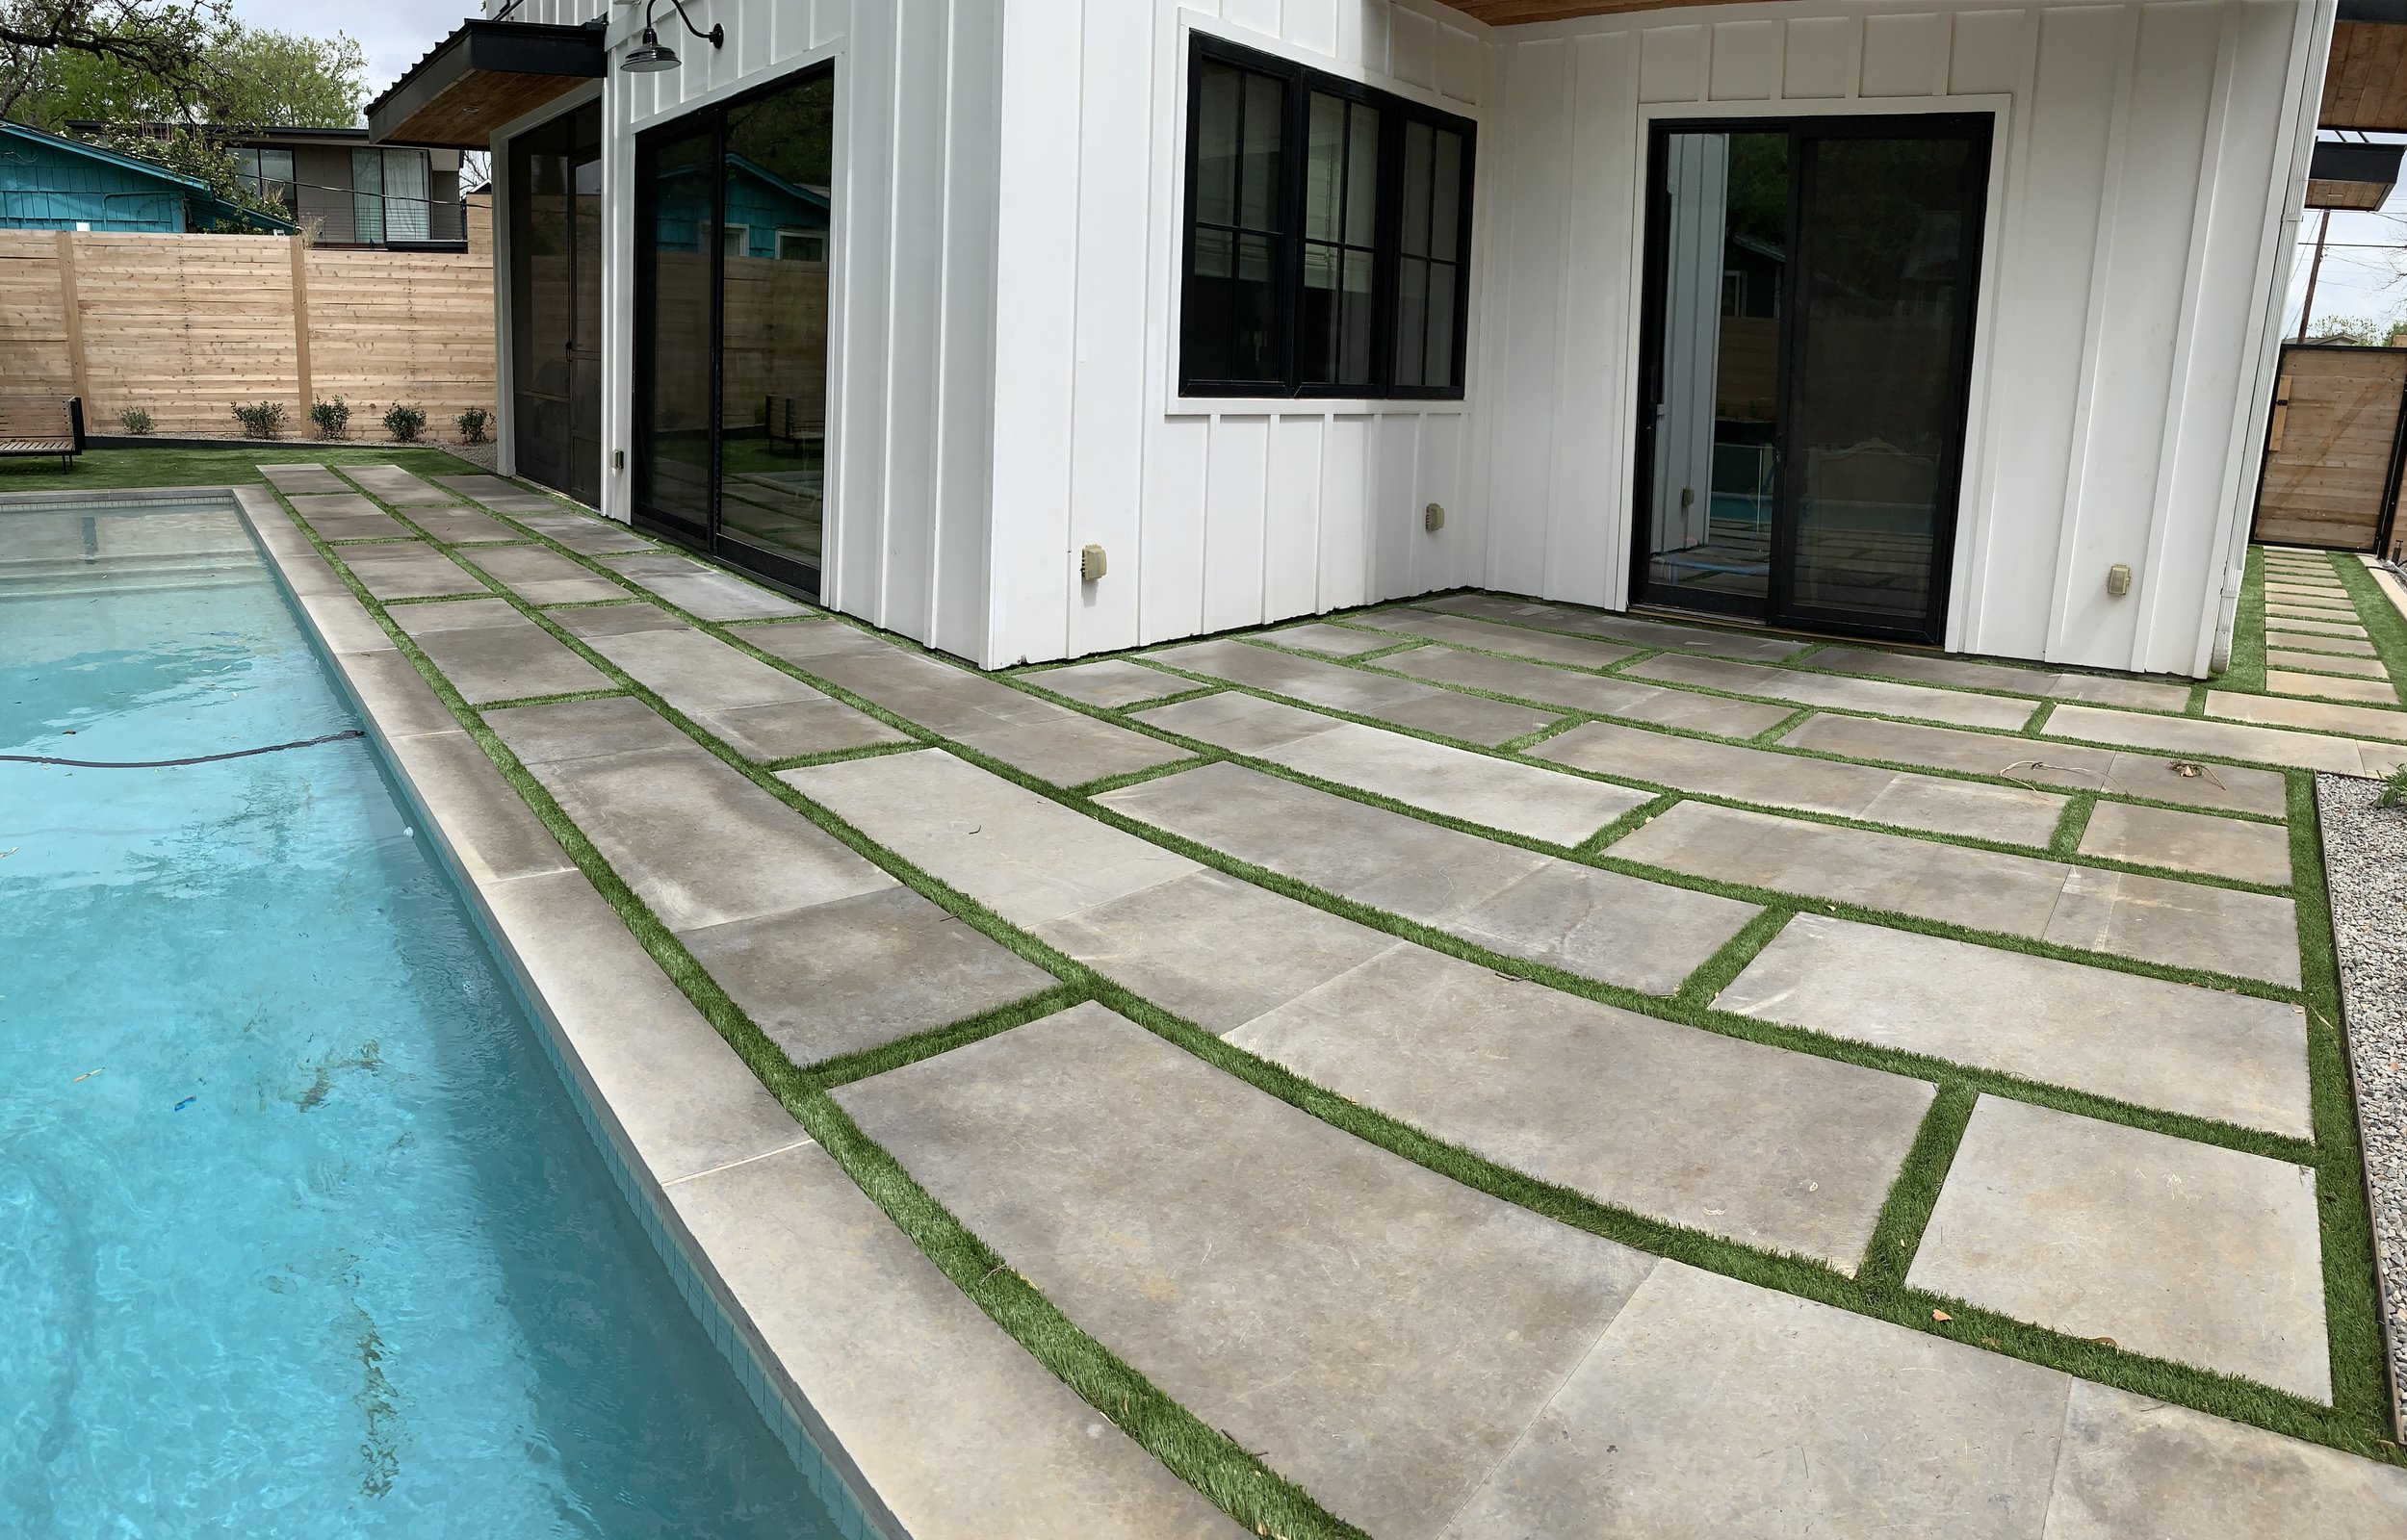 Lueder and Artificial Turf Patio